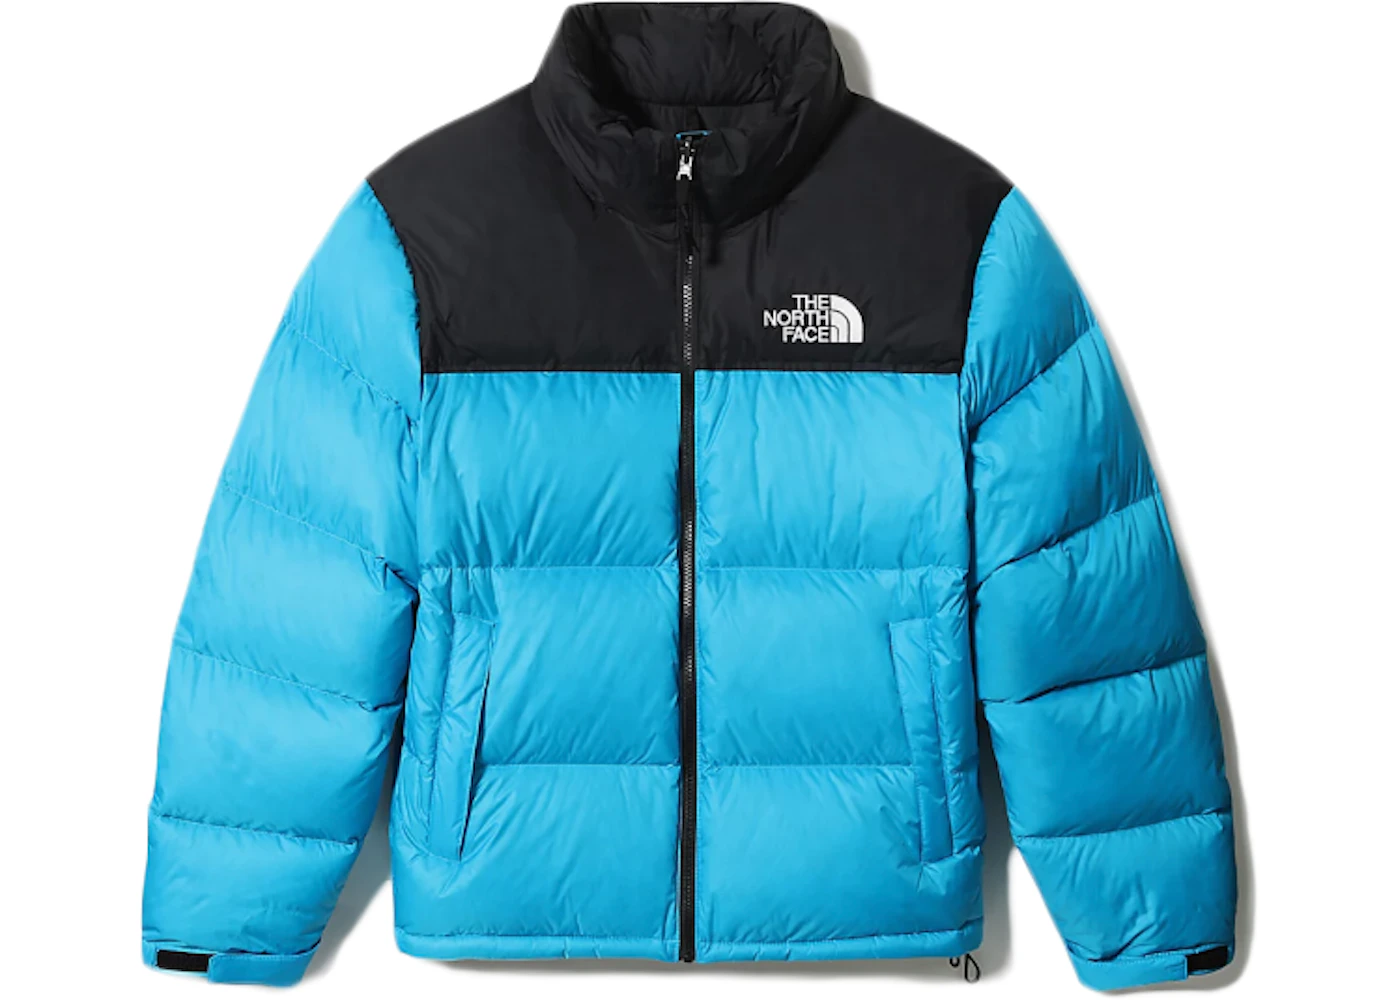 The North Face 1996 Retro Nuptse Packable Jacket Meridian Blue